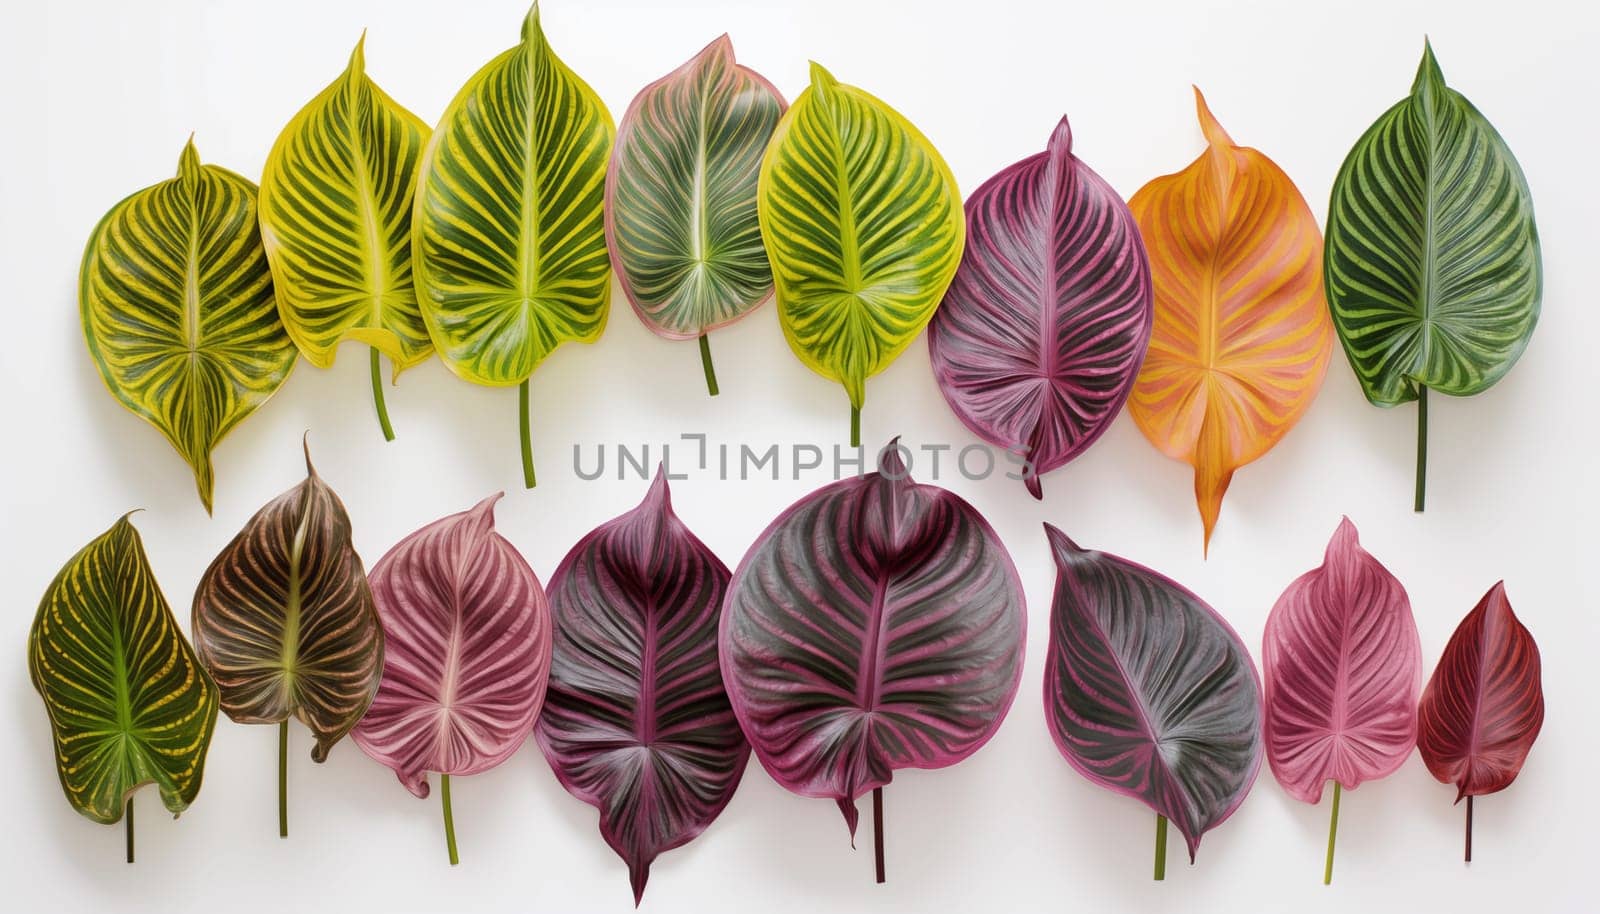 colorful Prayer Plants, isolated, white background. High quality photo